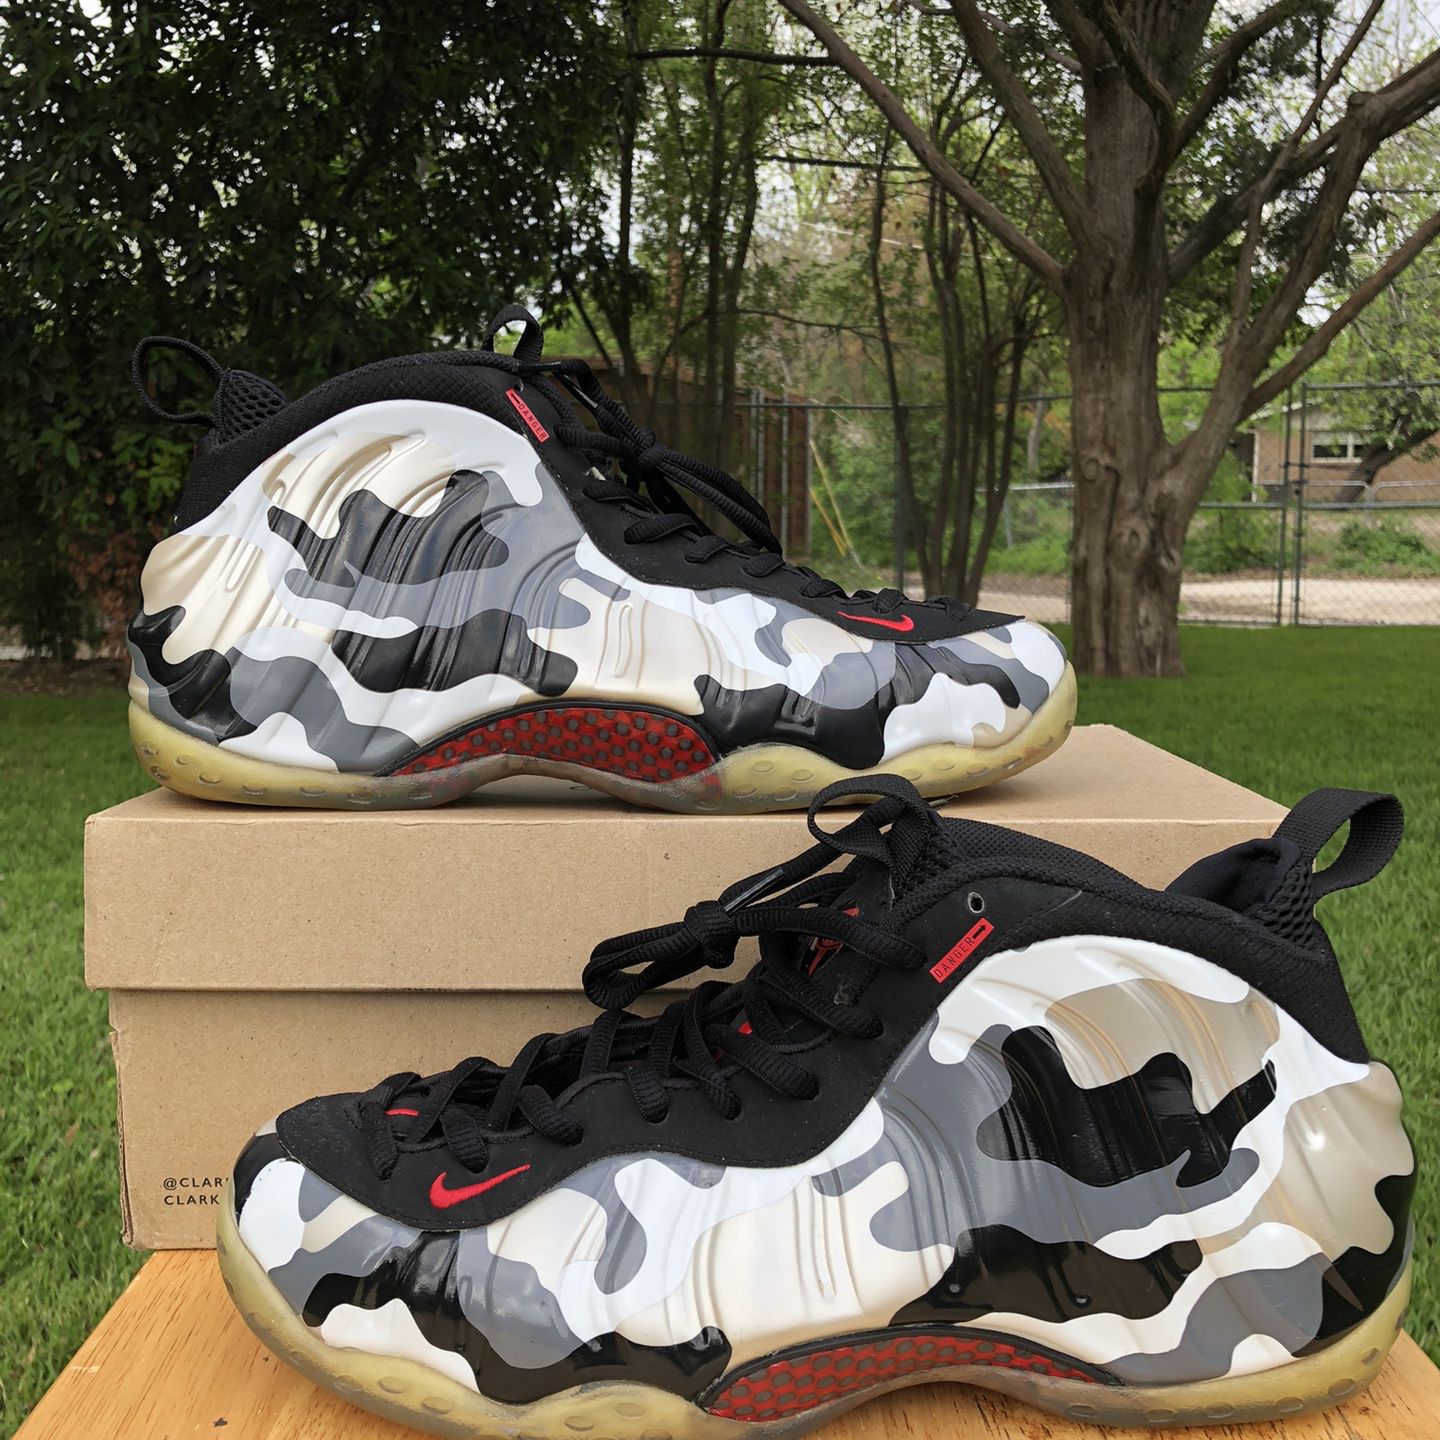 NIKE FOAMPOSITE ONE Penny Hardaway FIGHTER JET WHITE BLACK CAMO 575420-001  SZ 11.5 VNDS for Sale in Mesquite, TX - OfferUp